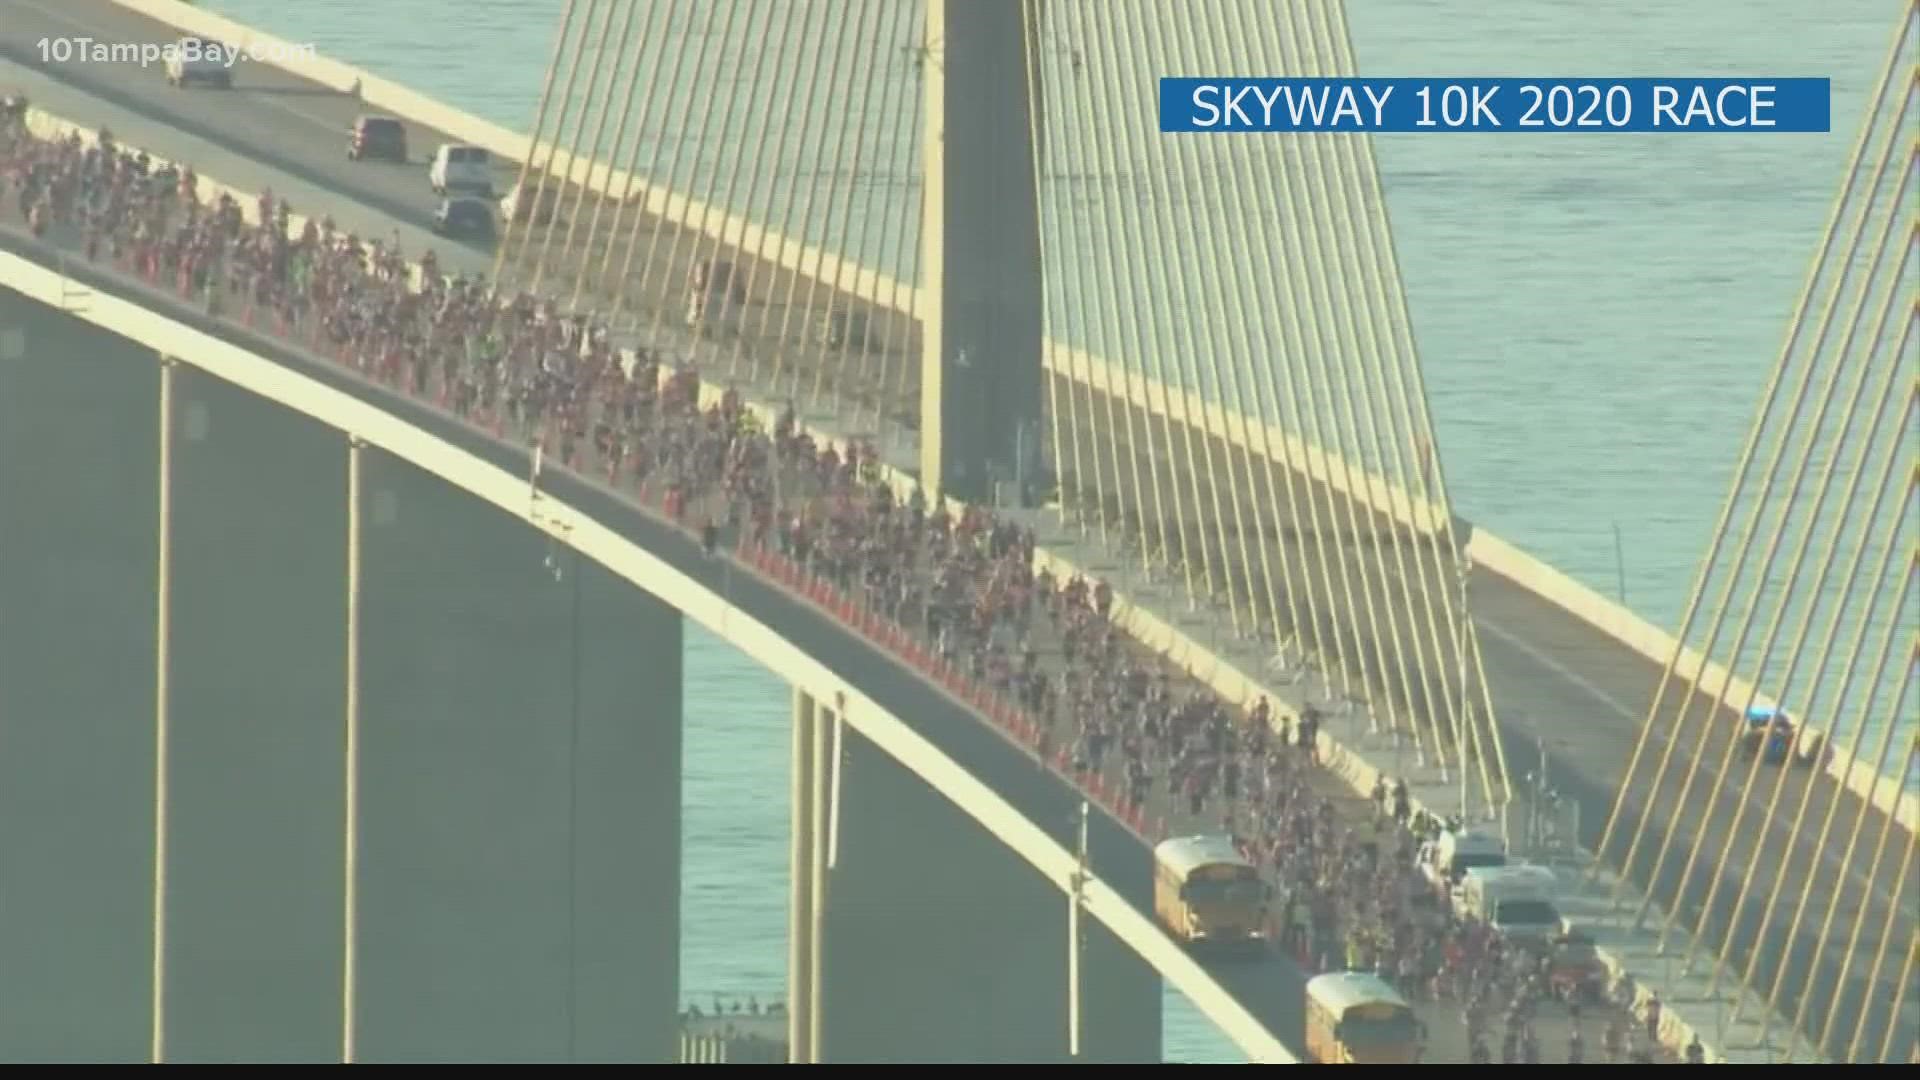 After this year's virtual race, the 2022 Skyway 10k is scheduled to be held in person.